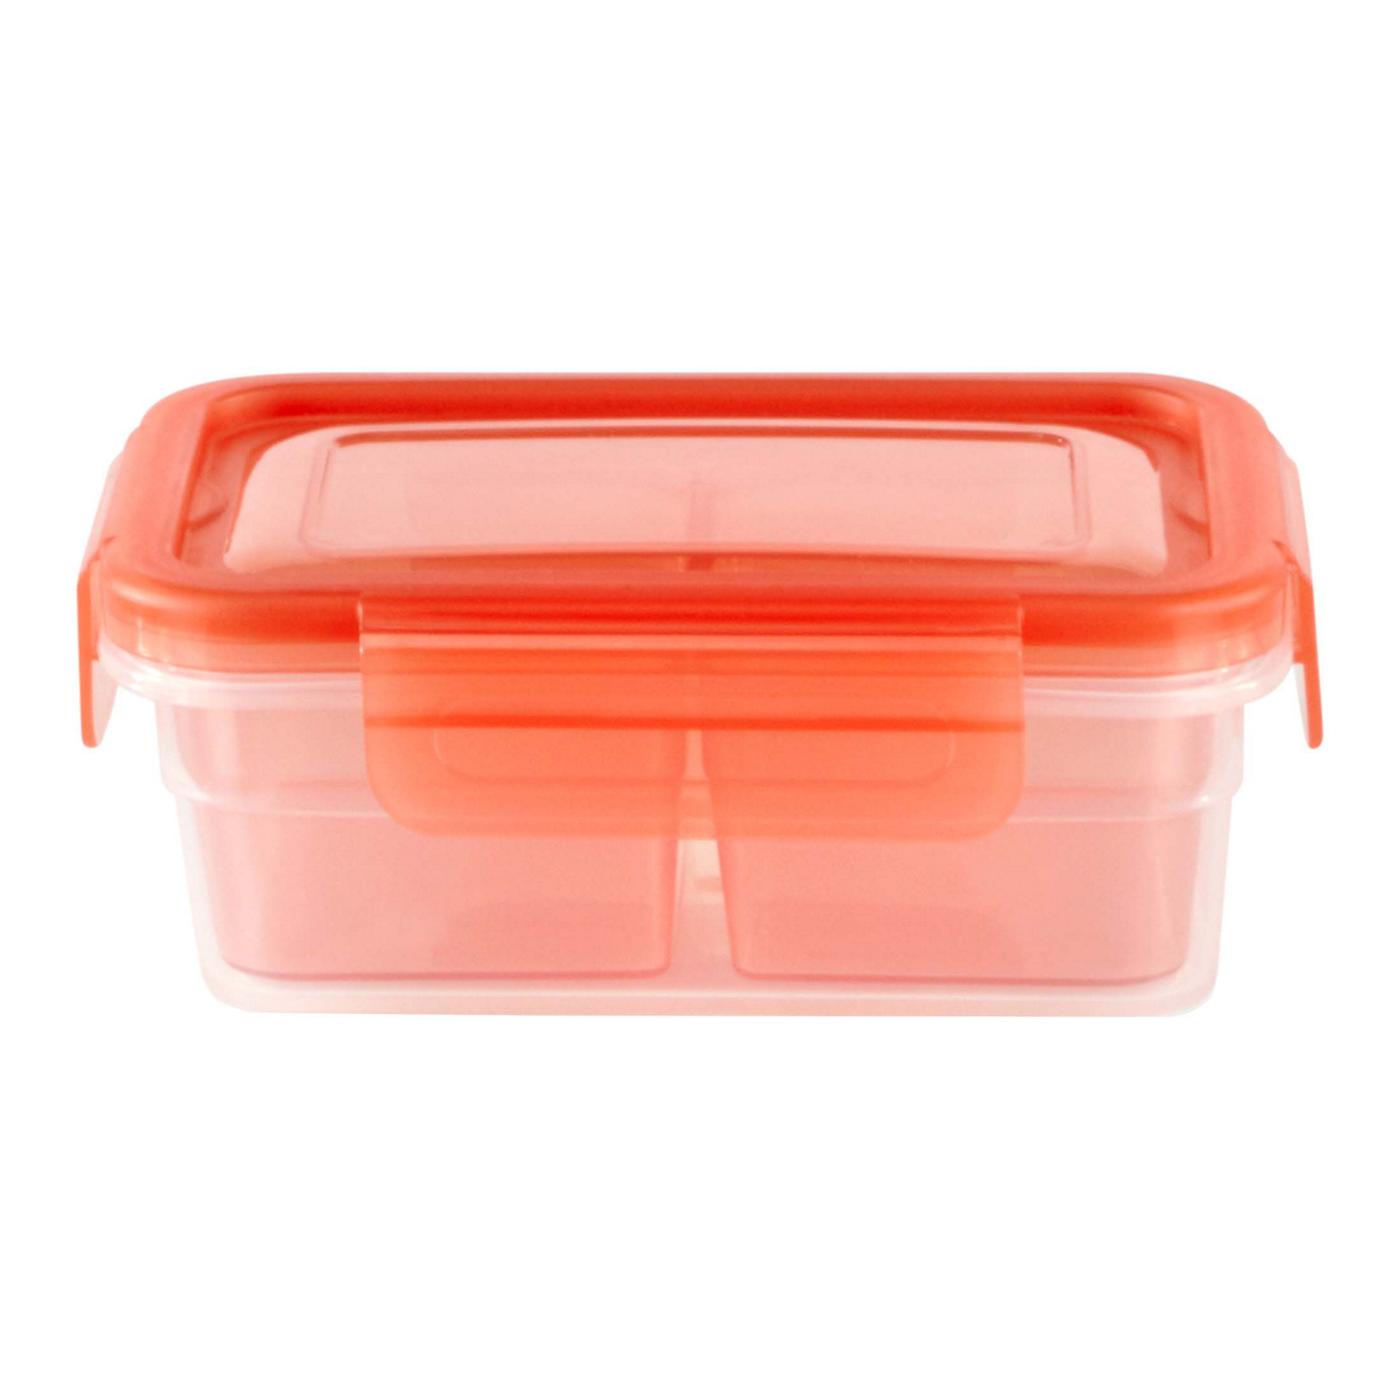 Snapware 2 Tray Reusable Meal Prep Containers; image 1 of 2